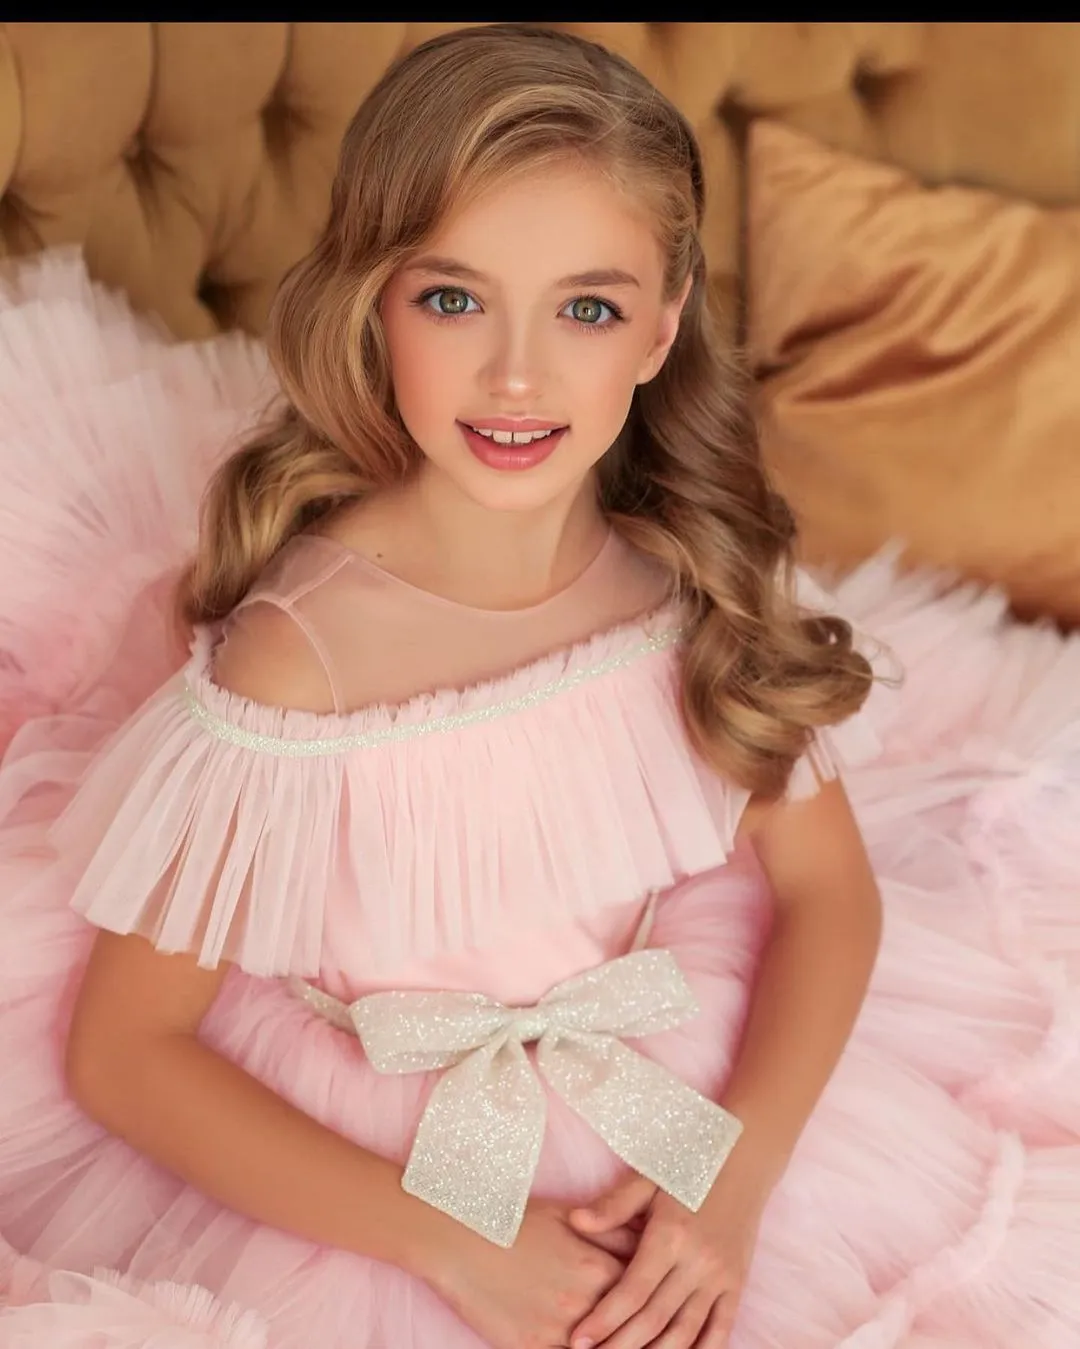 Buy Formal Prom Pageant Wedding Girls Dresses A-line Knee Length Tutu  Ruffle Dress Princess Party Infant Baby Dress 6M Gold B 70 at Amazon.in